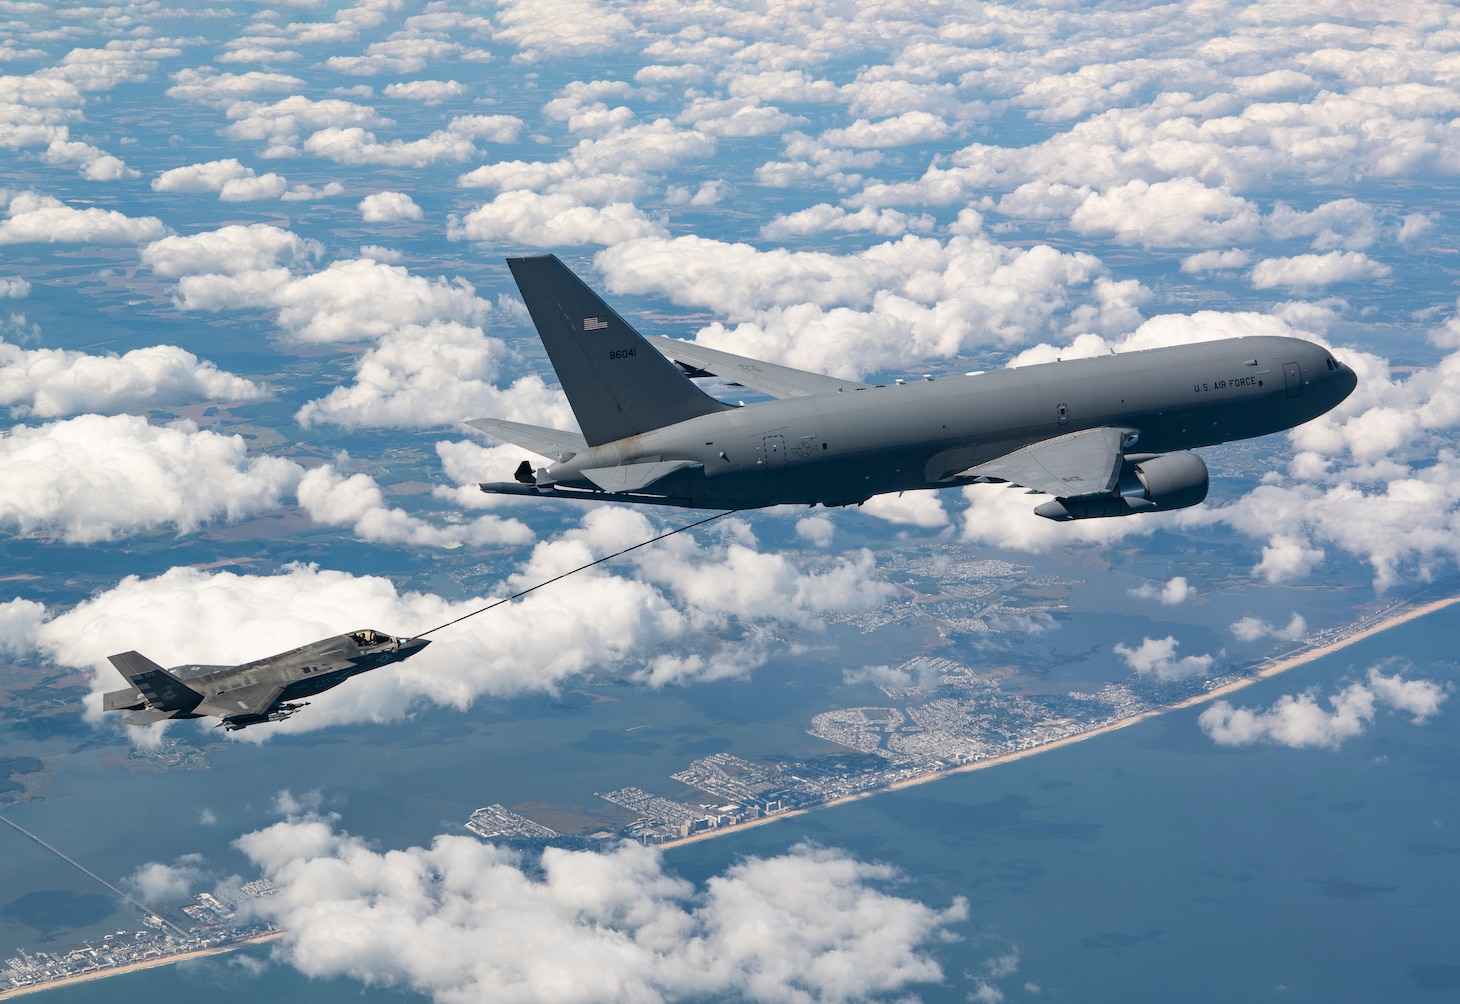 Maj Paul "Rabbit" Gucwa conducts tanker testing with KC-46 from BF-19 out of NAS Patuxent River, Md., on Sept 30, 2021.